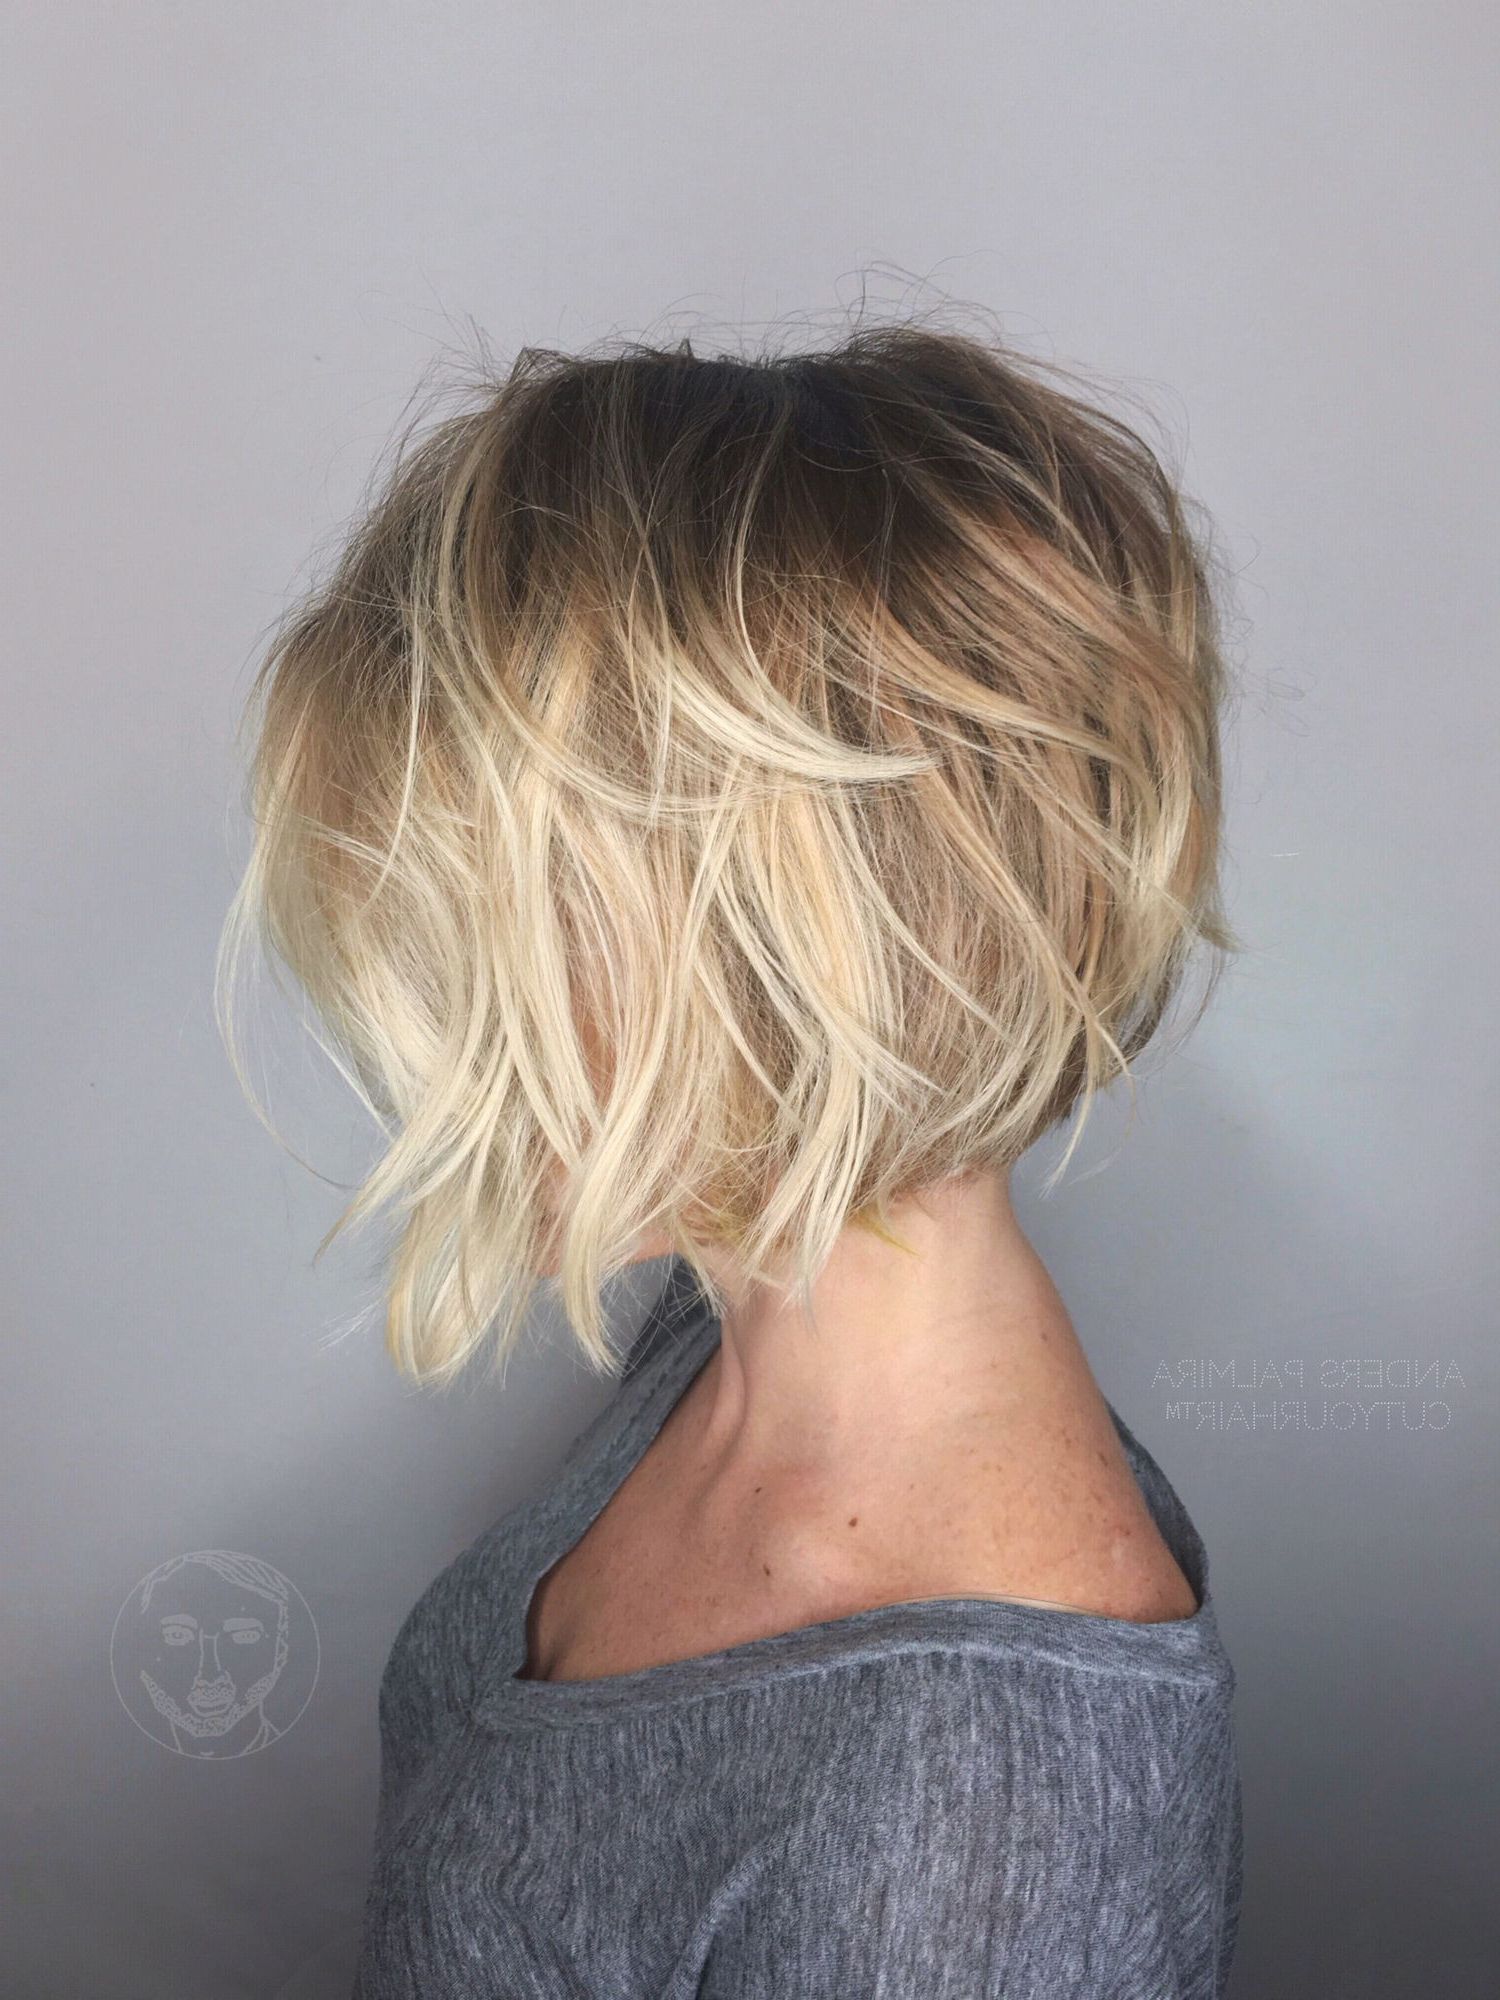 Hairstyles : Hair Highlights For Short Hair Exceptional With Highlighted Short Bob Haircuts (View 12 of 20)